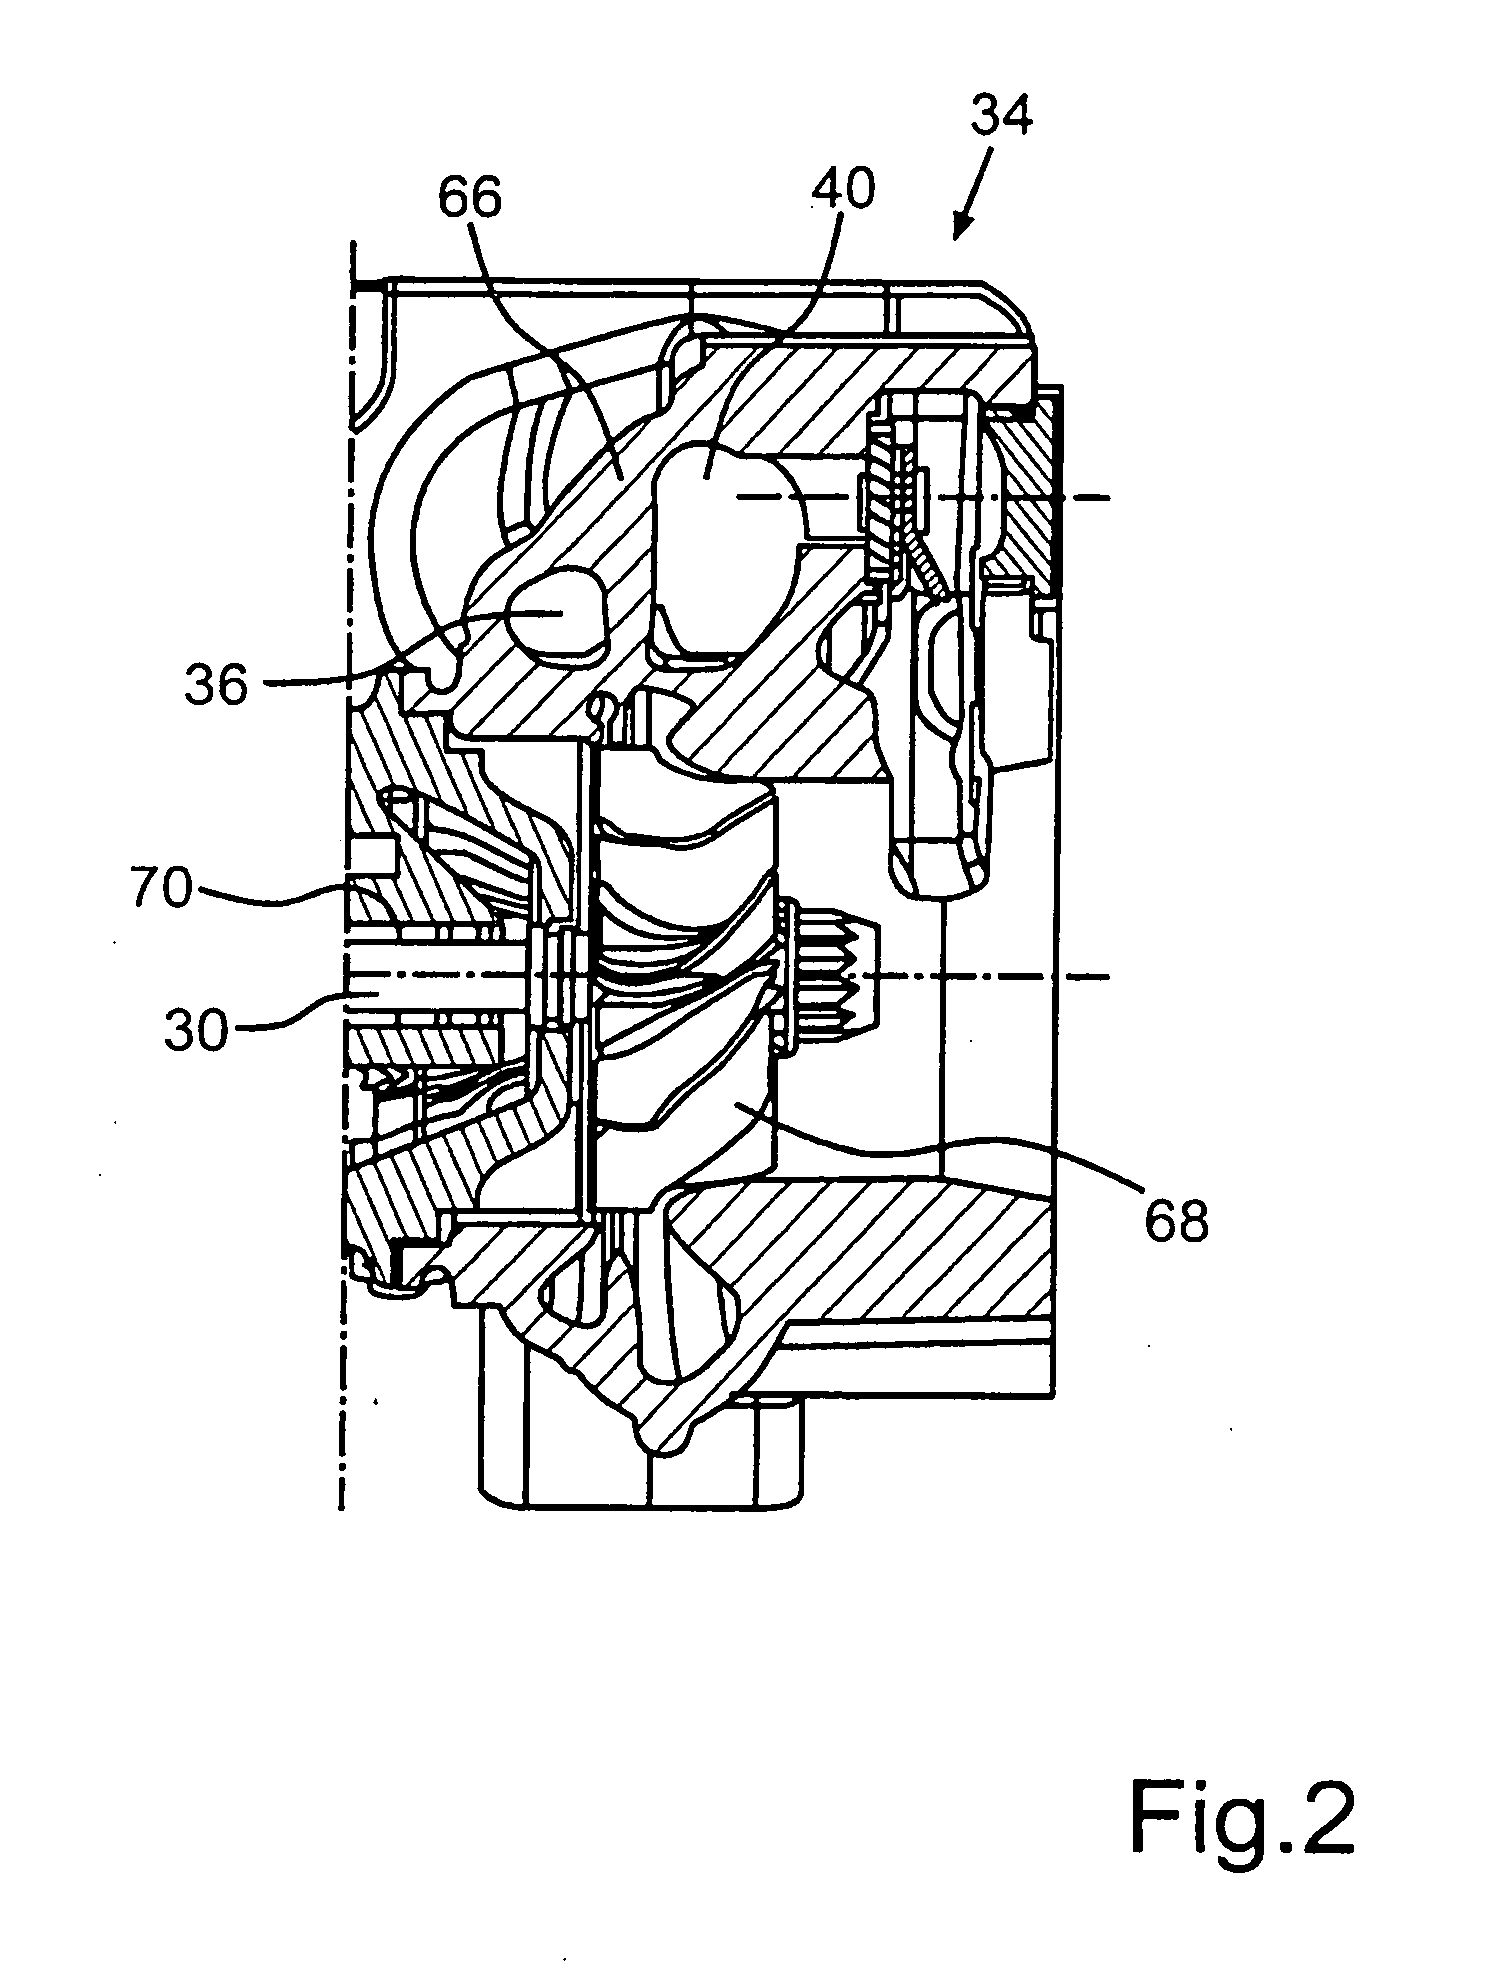 Air supply unit for a fuel cell stack, fuel cell system and method for operating an air supply unit